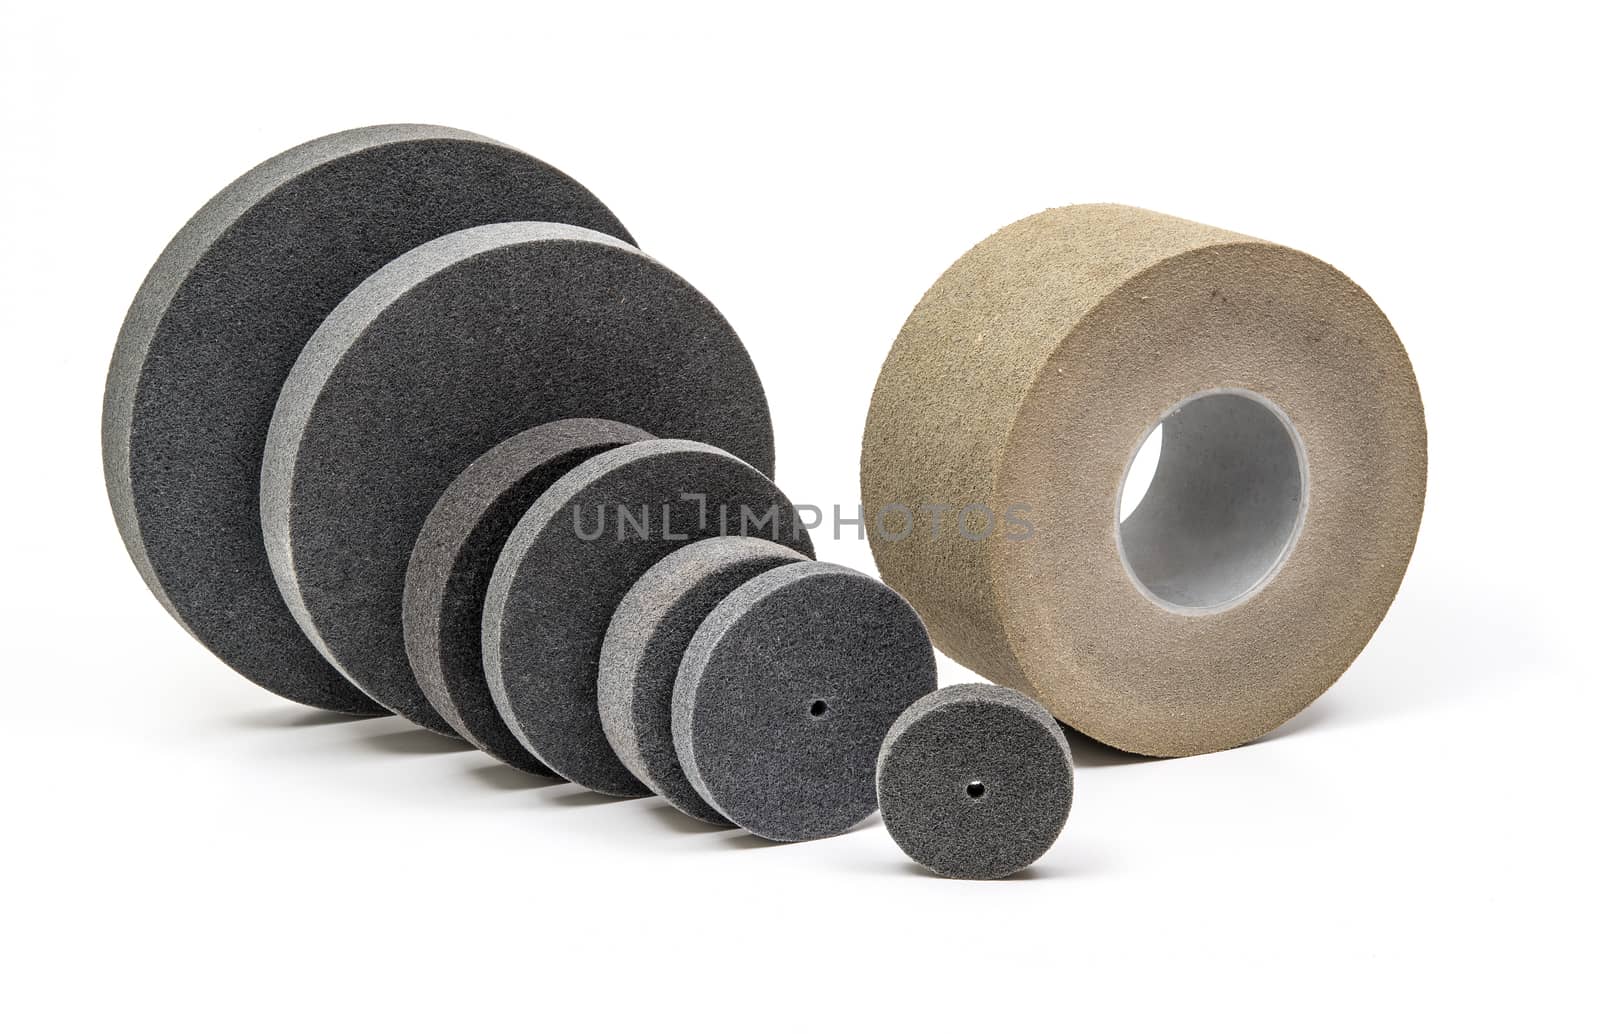 Professional Industrial grinding and polishing wheels on white background